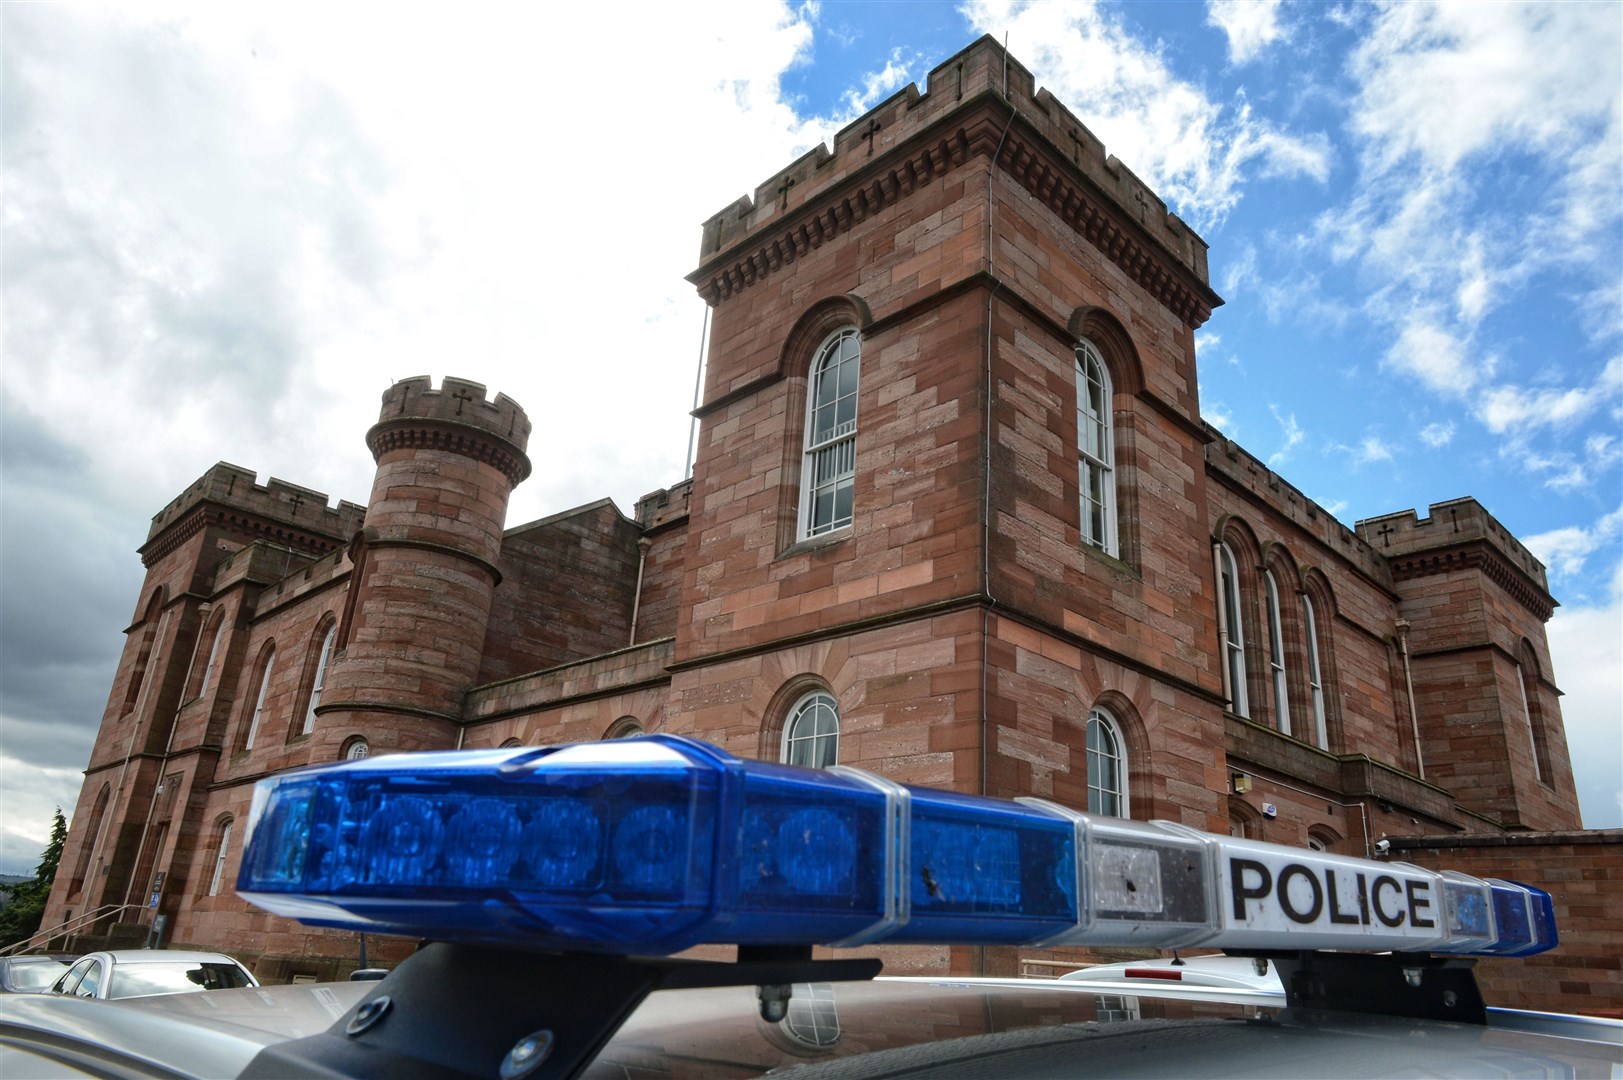 Sentencing on the case was carried out at Inverness Sheriff Court.